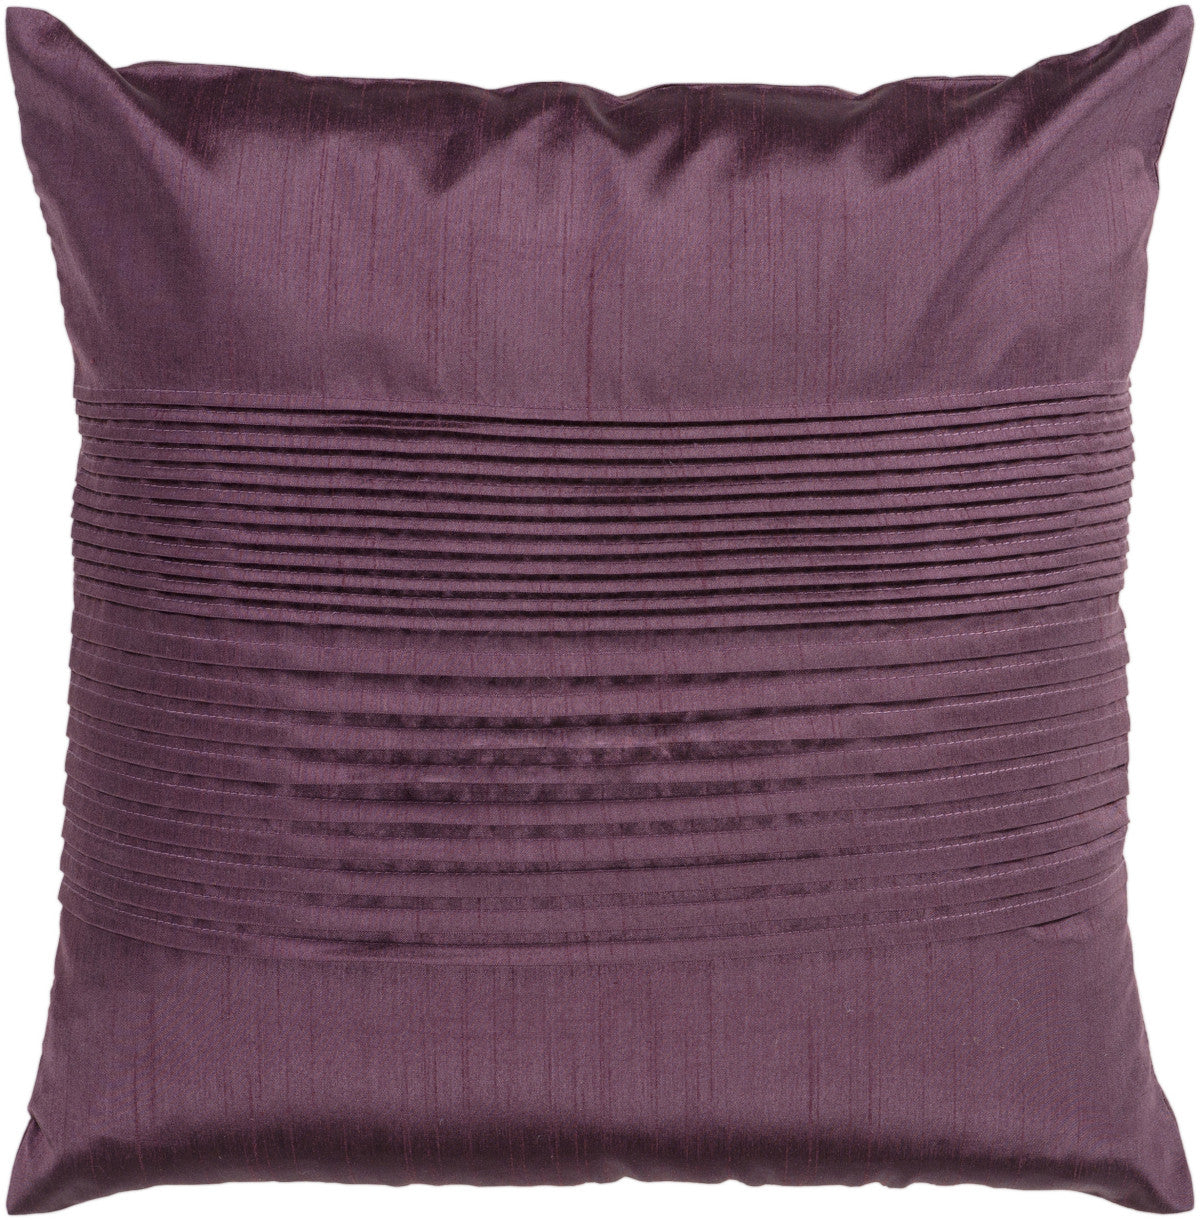 Surya Solid Pleated Lori Lee HH-016 Pillow